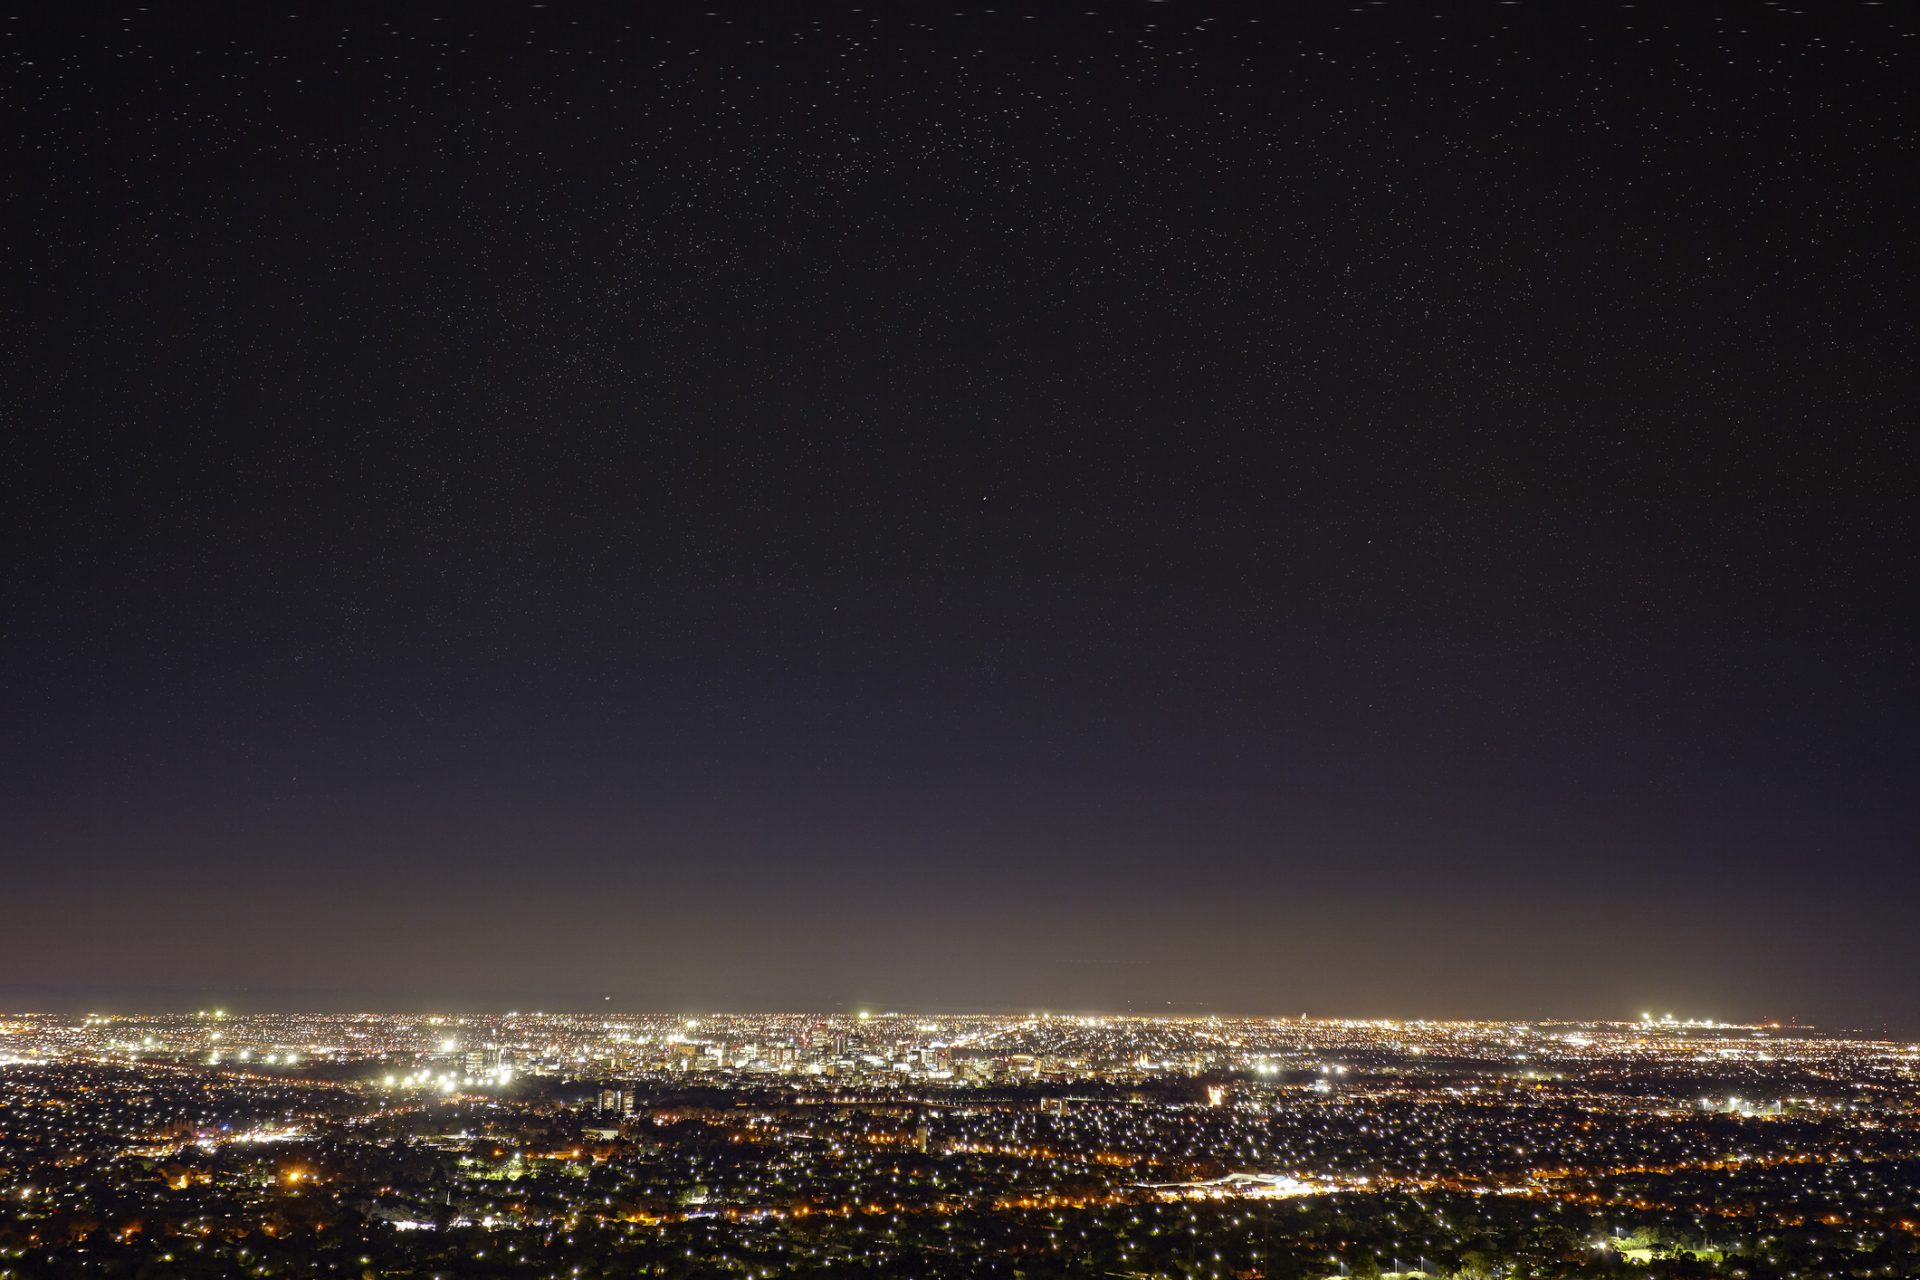 Light pollution is affecting our view of the stars